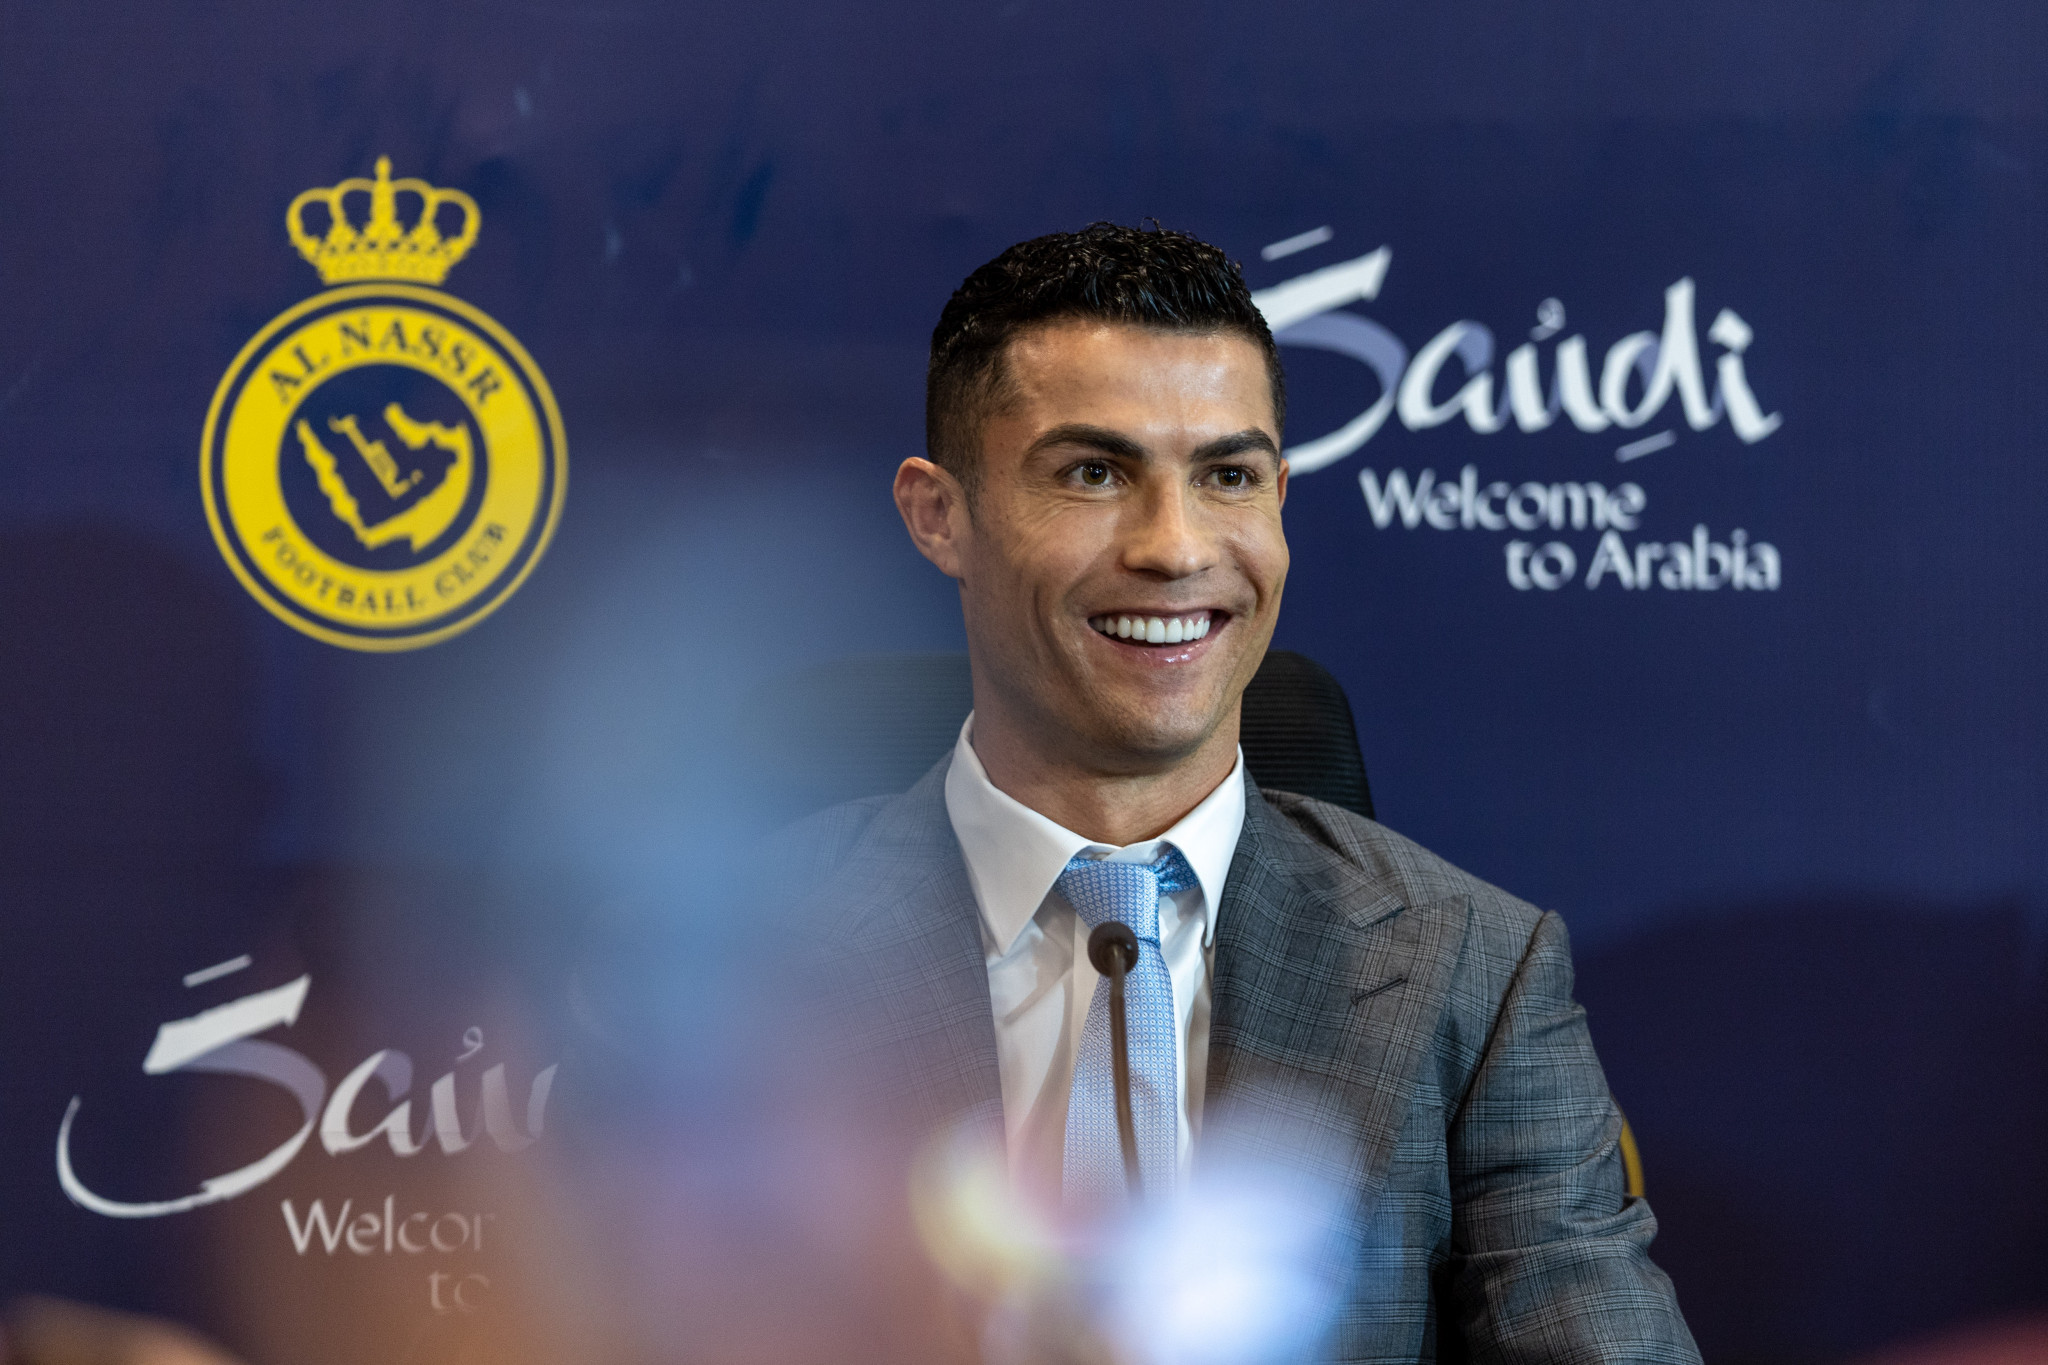 Cristiano Ronaldo joined Al-Nassr late last year ©Getty Images